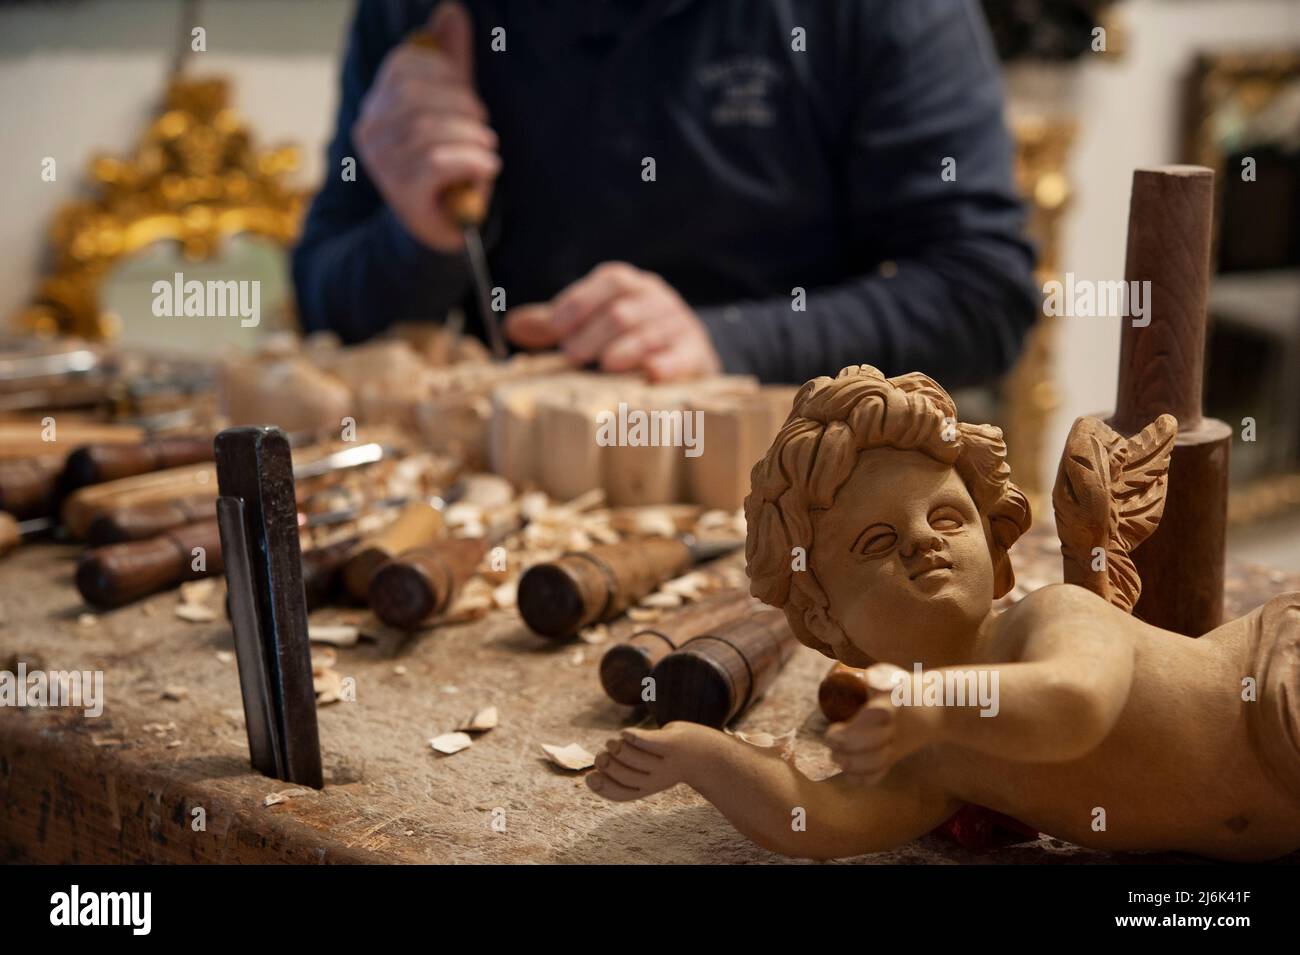 Master woodcarver at work. Wood shavings, gouges and chisels on the workbench. Angel wood carved in the foreground.. Stock Photo